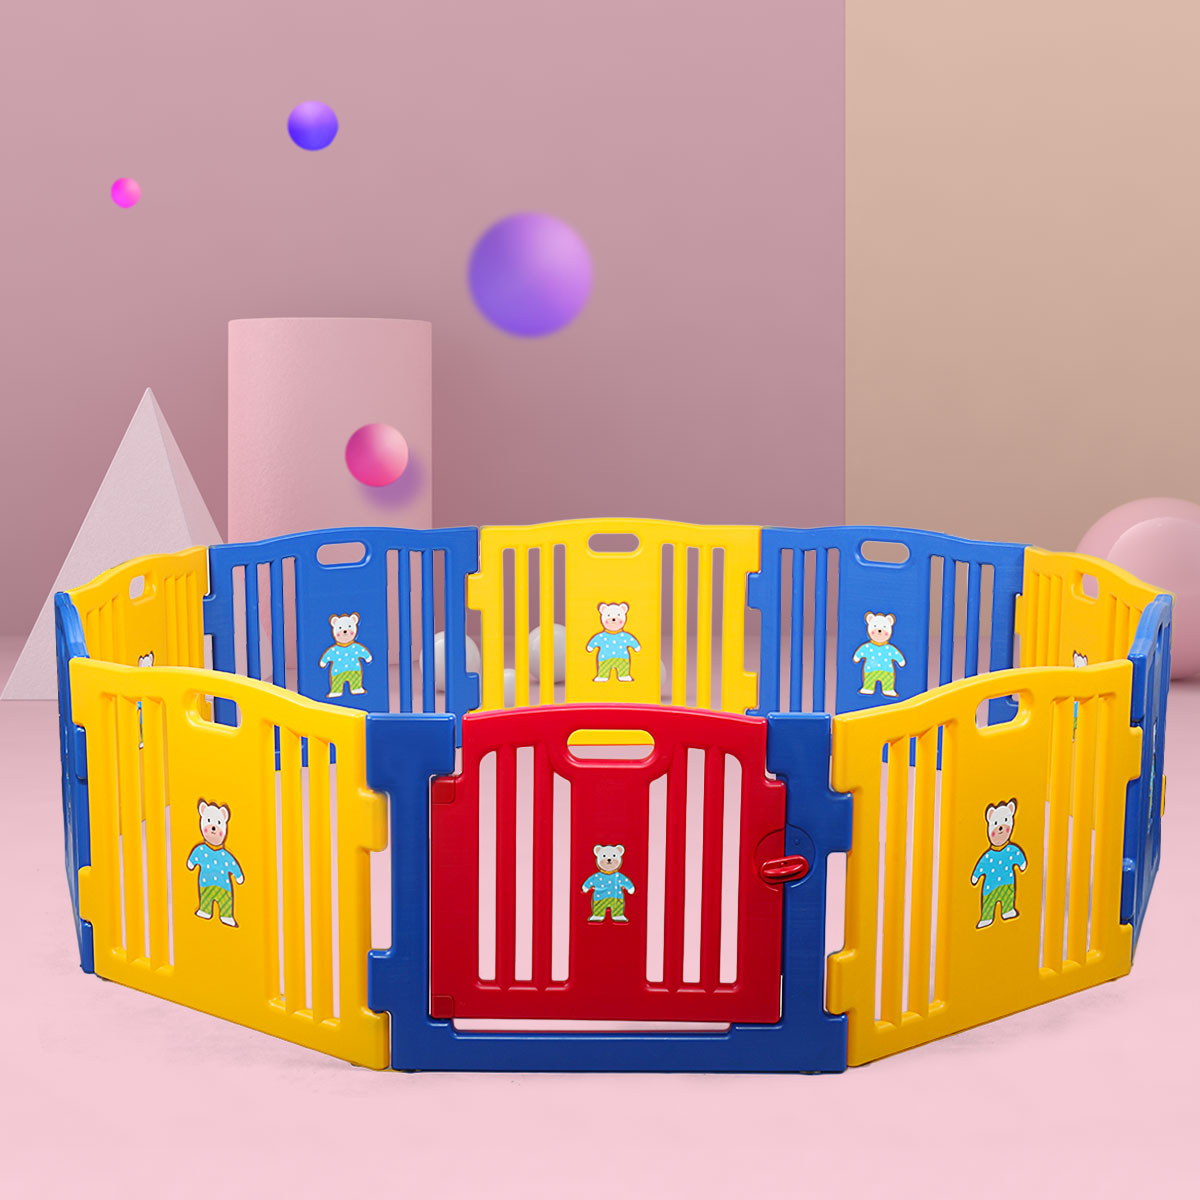 What to Consider When Buying a Baby Playpen?